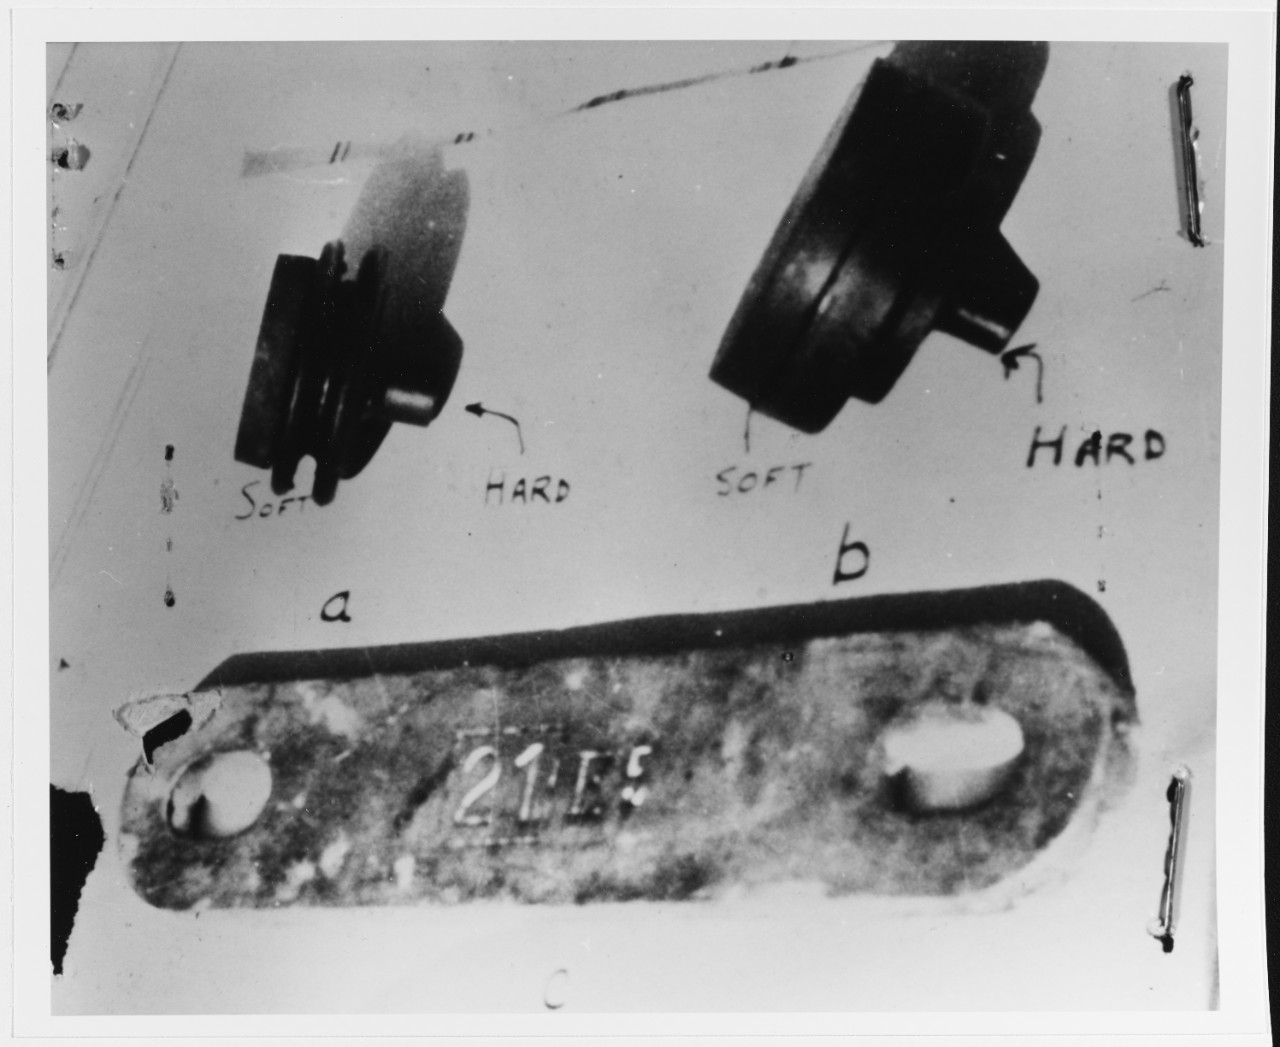 German submarine battery cell feet, pads and inter-connector bar